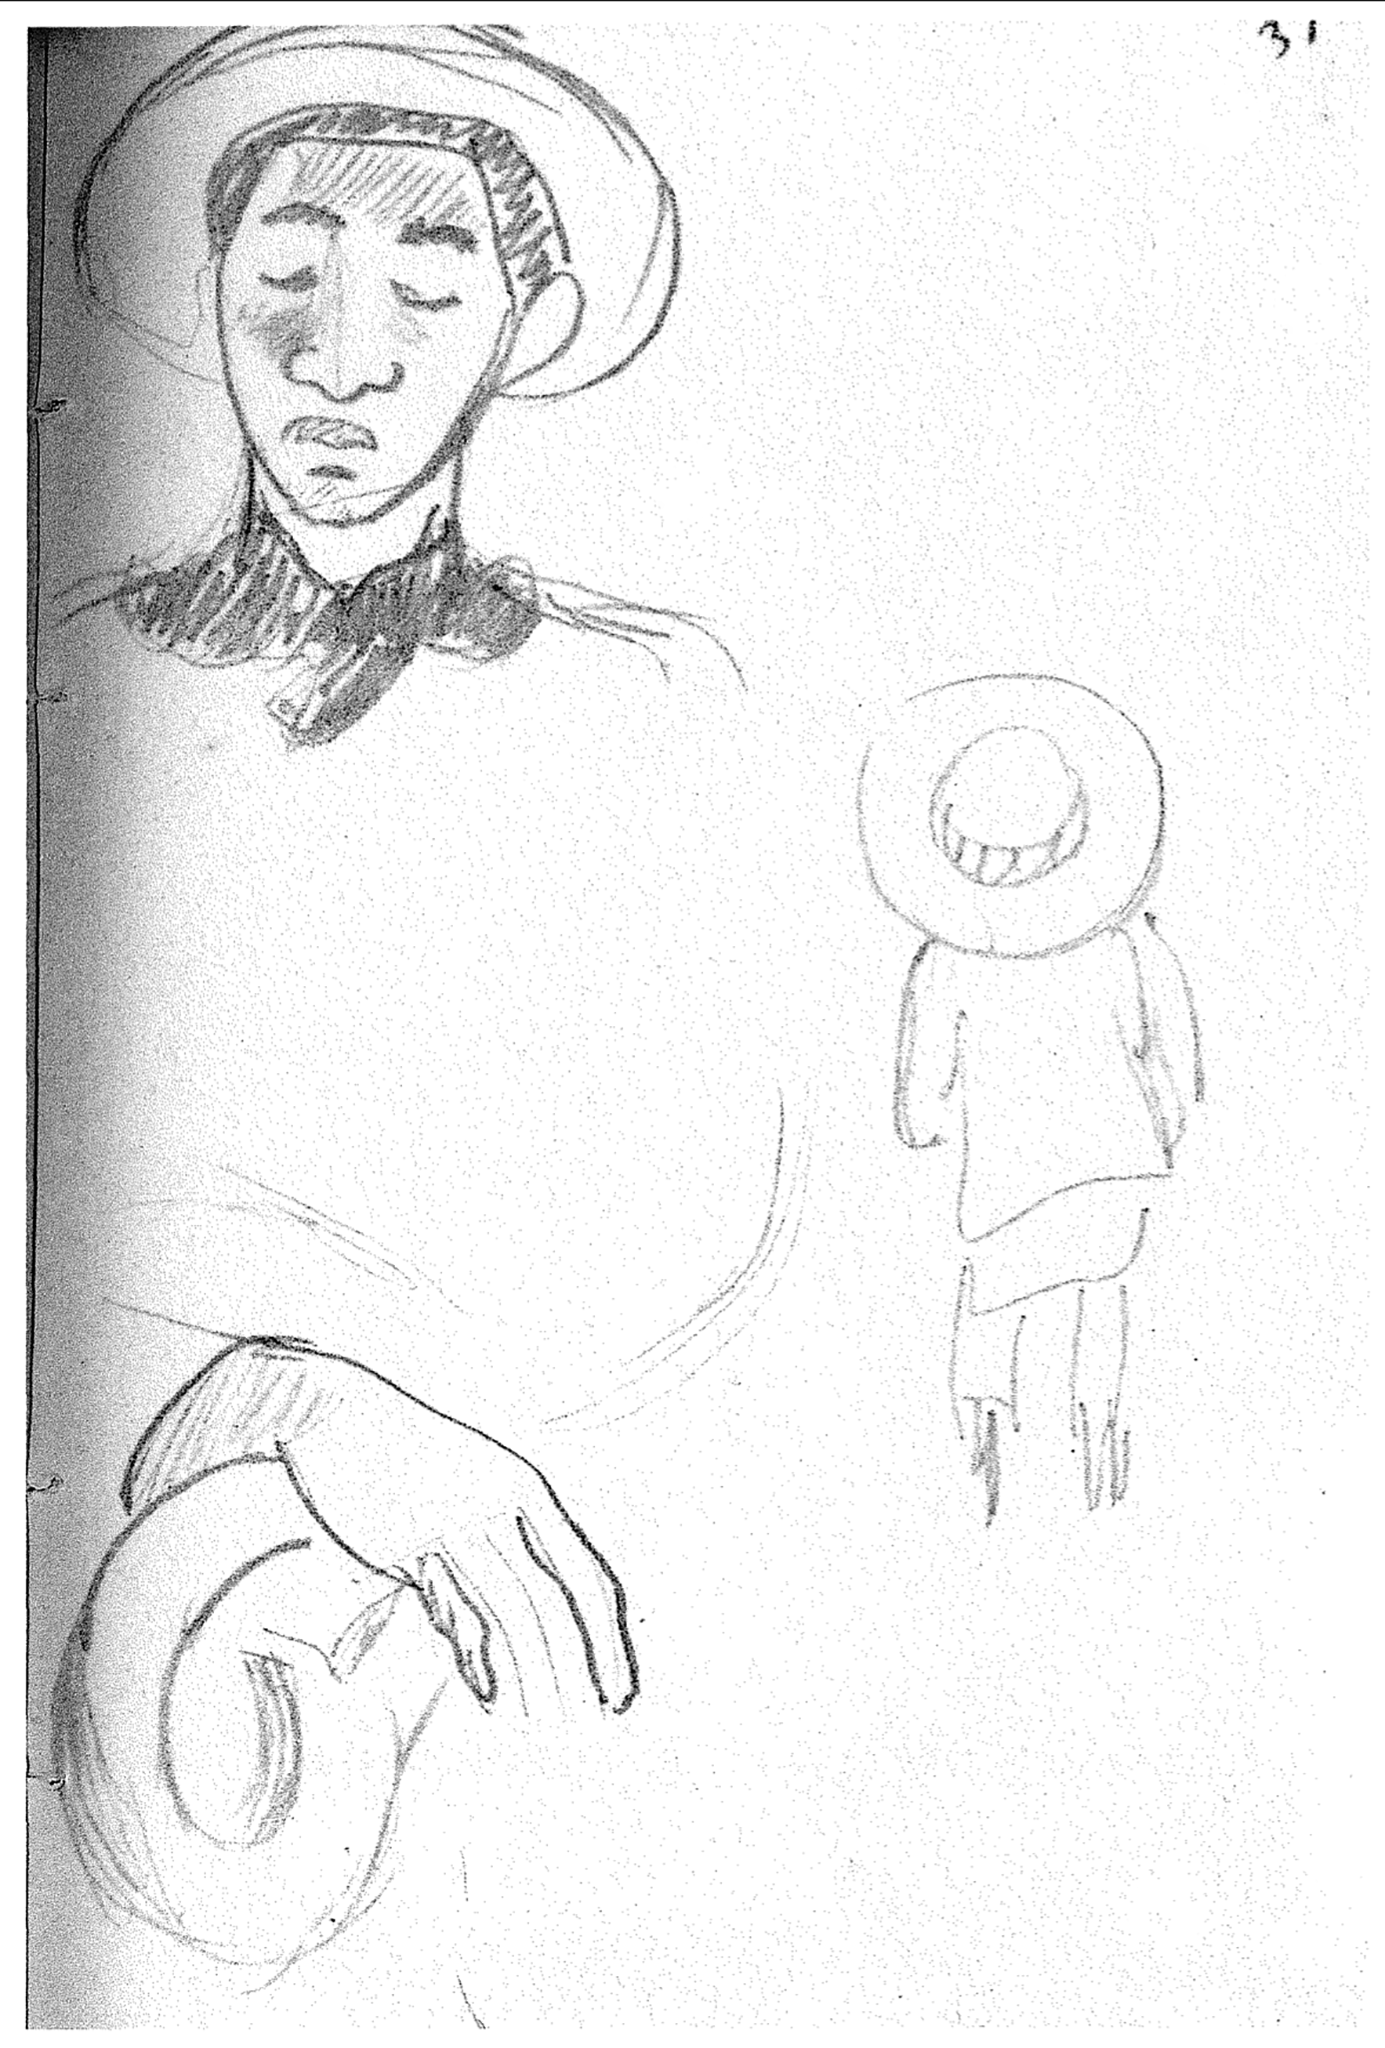 A variety of three different sketches on the same page. One is a man with a straw hat and a black collar. The second is another sketch of the back of a figure with a big hat. The last is a hand resting on the armrest of a chair.